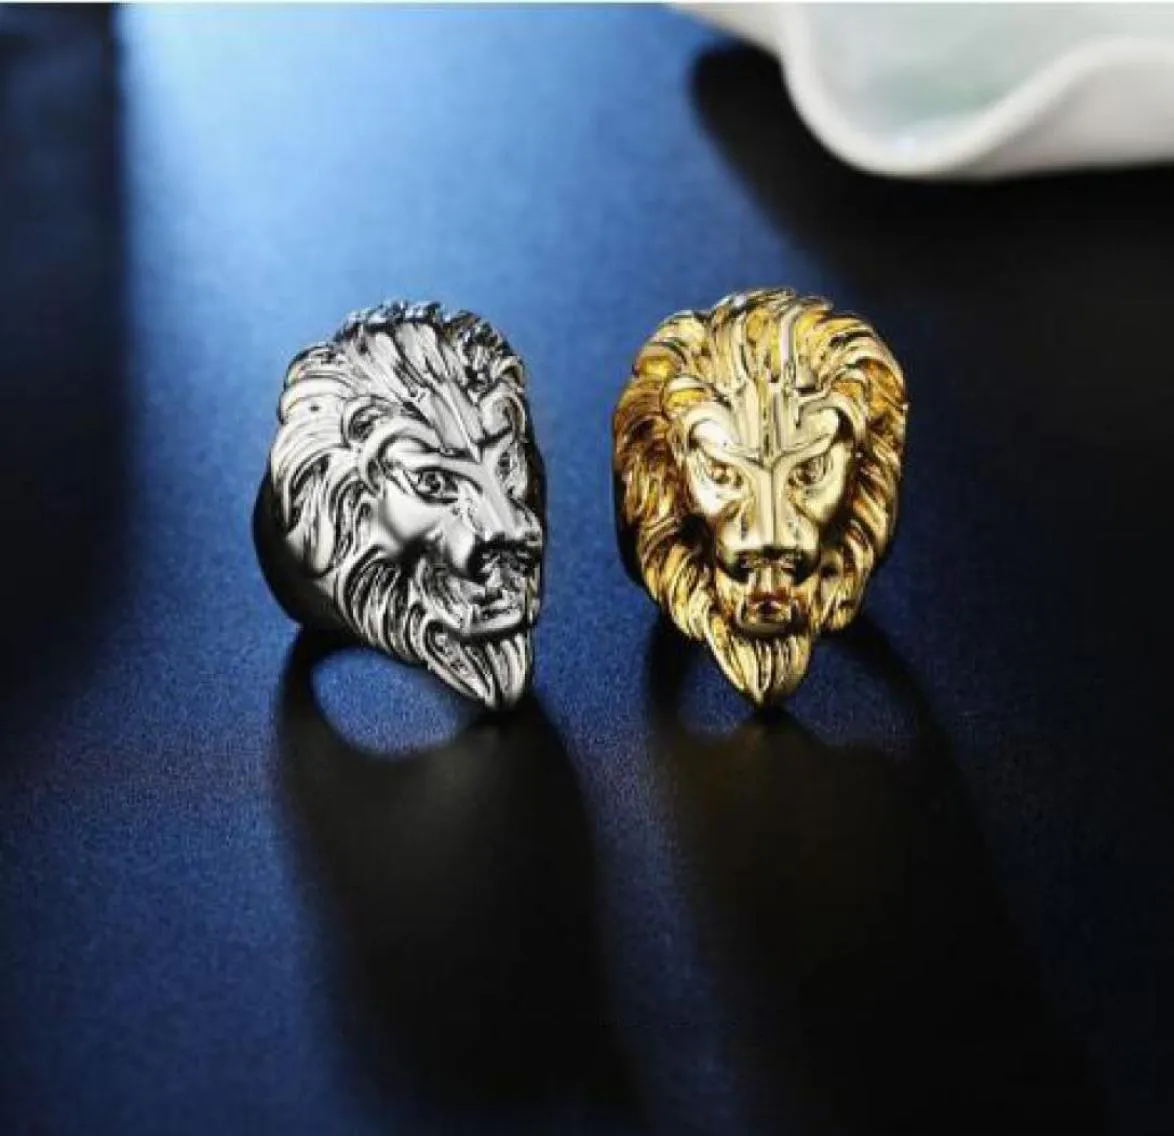 Whole2020 Gold Silver Color Lion 039s Head Men Hip Hop Rings Fashion Punk Animal Shape Ring Male Hiphop Jewelry Gifts3177224